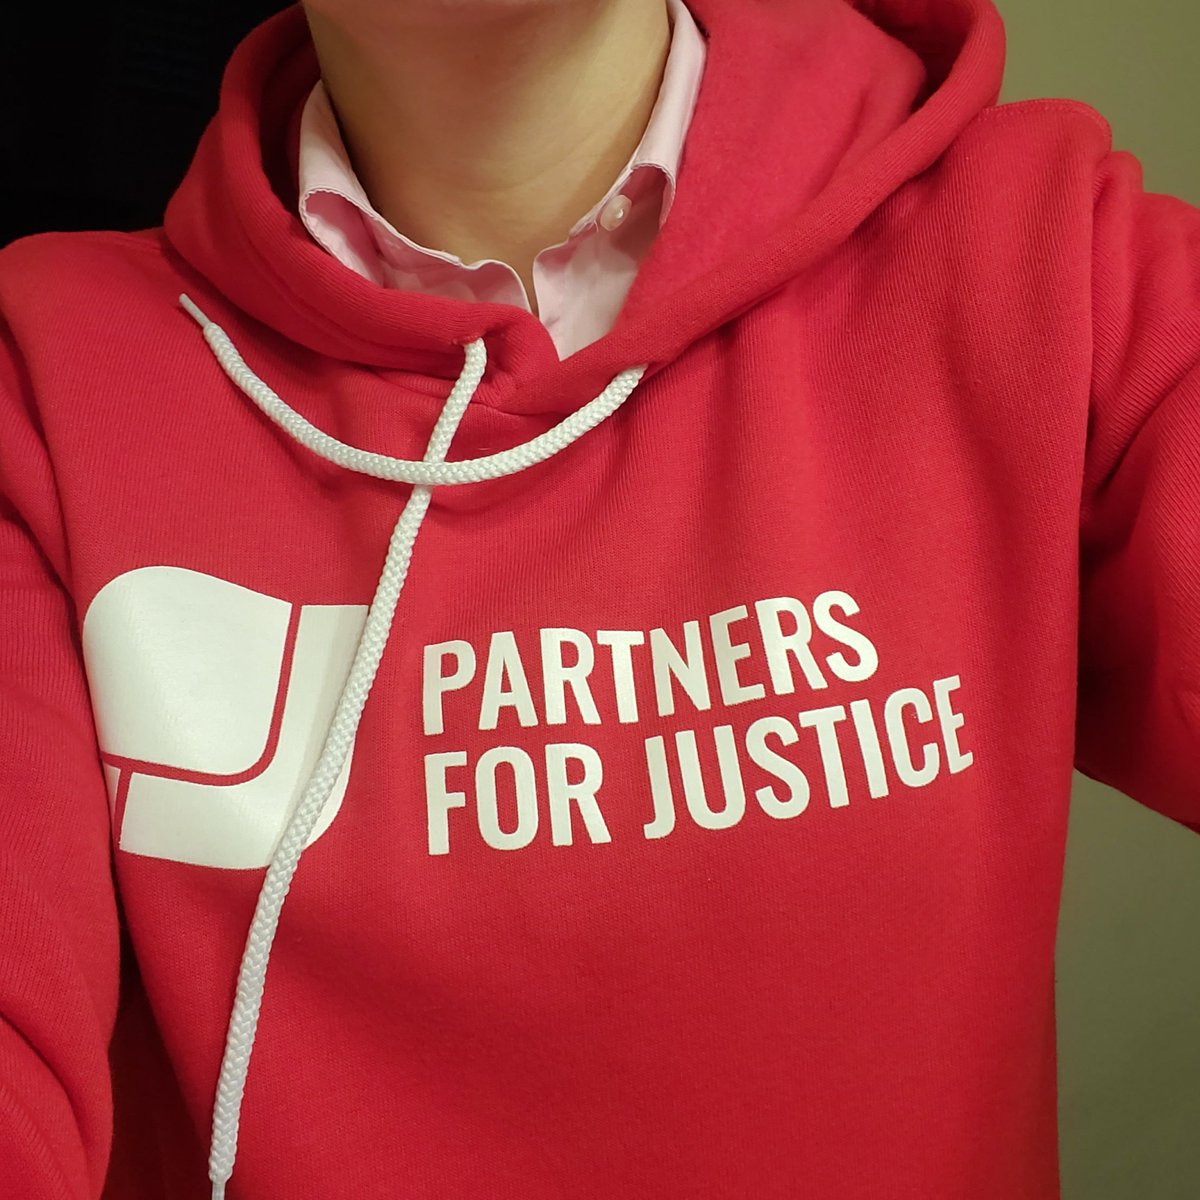 Straight from the package, not even washed yet. Love it! Thank you, @GalvinAlmanza & @TurnNinety #empowerpublicdefense #fundpublicdefense